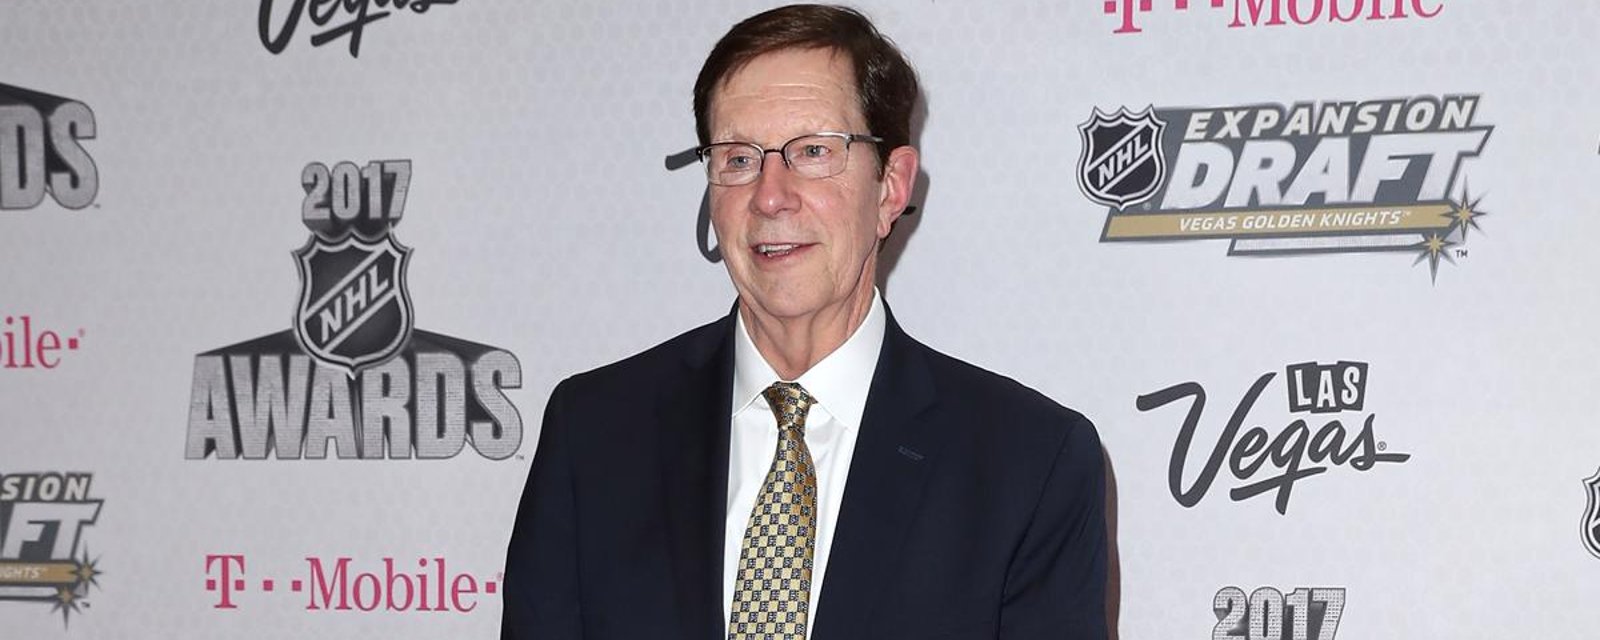 David Poile confirms two players won't be back in Nashville. 